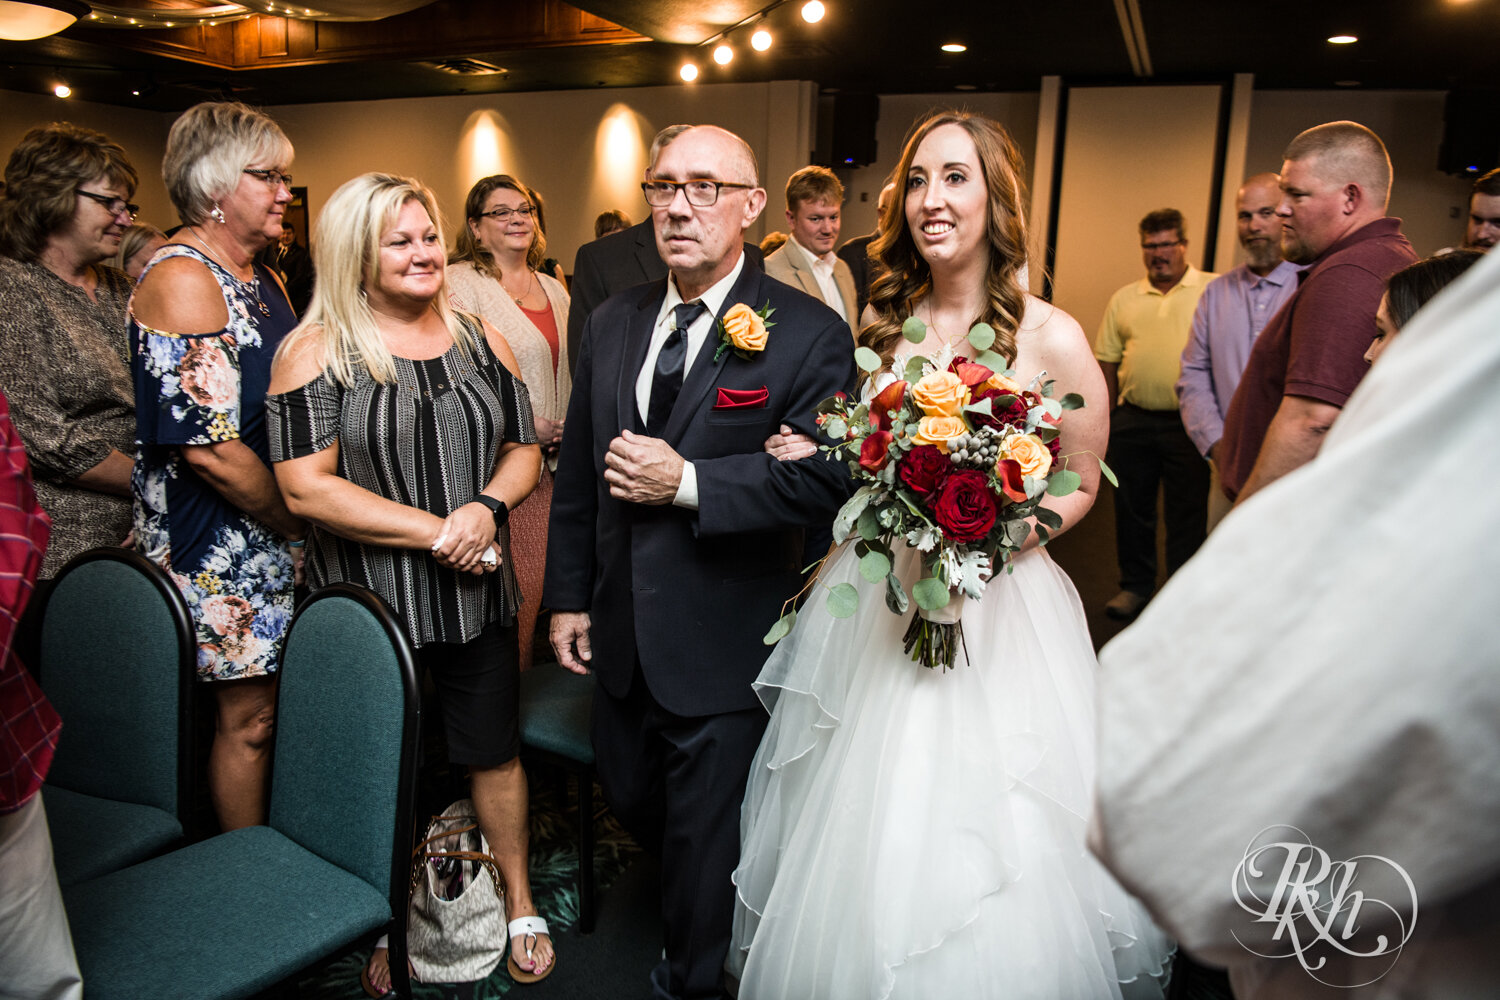 Bride walks down the aisle with dad at indoor wedding ceremony at Rockwoods in Otsego, Minnesota.